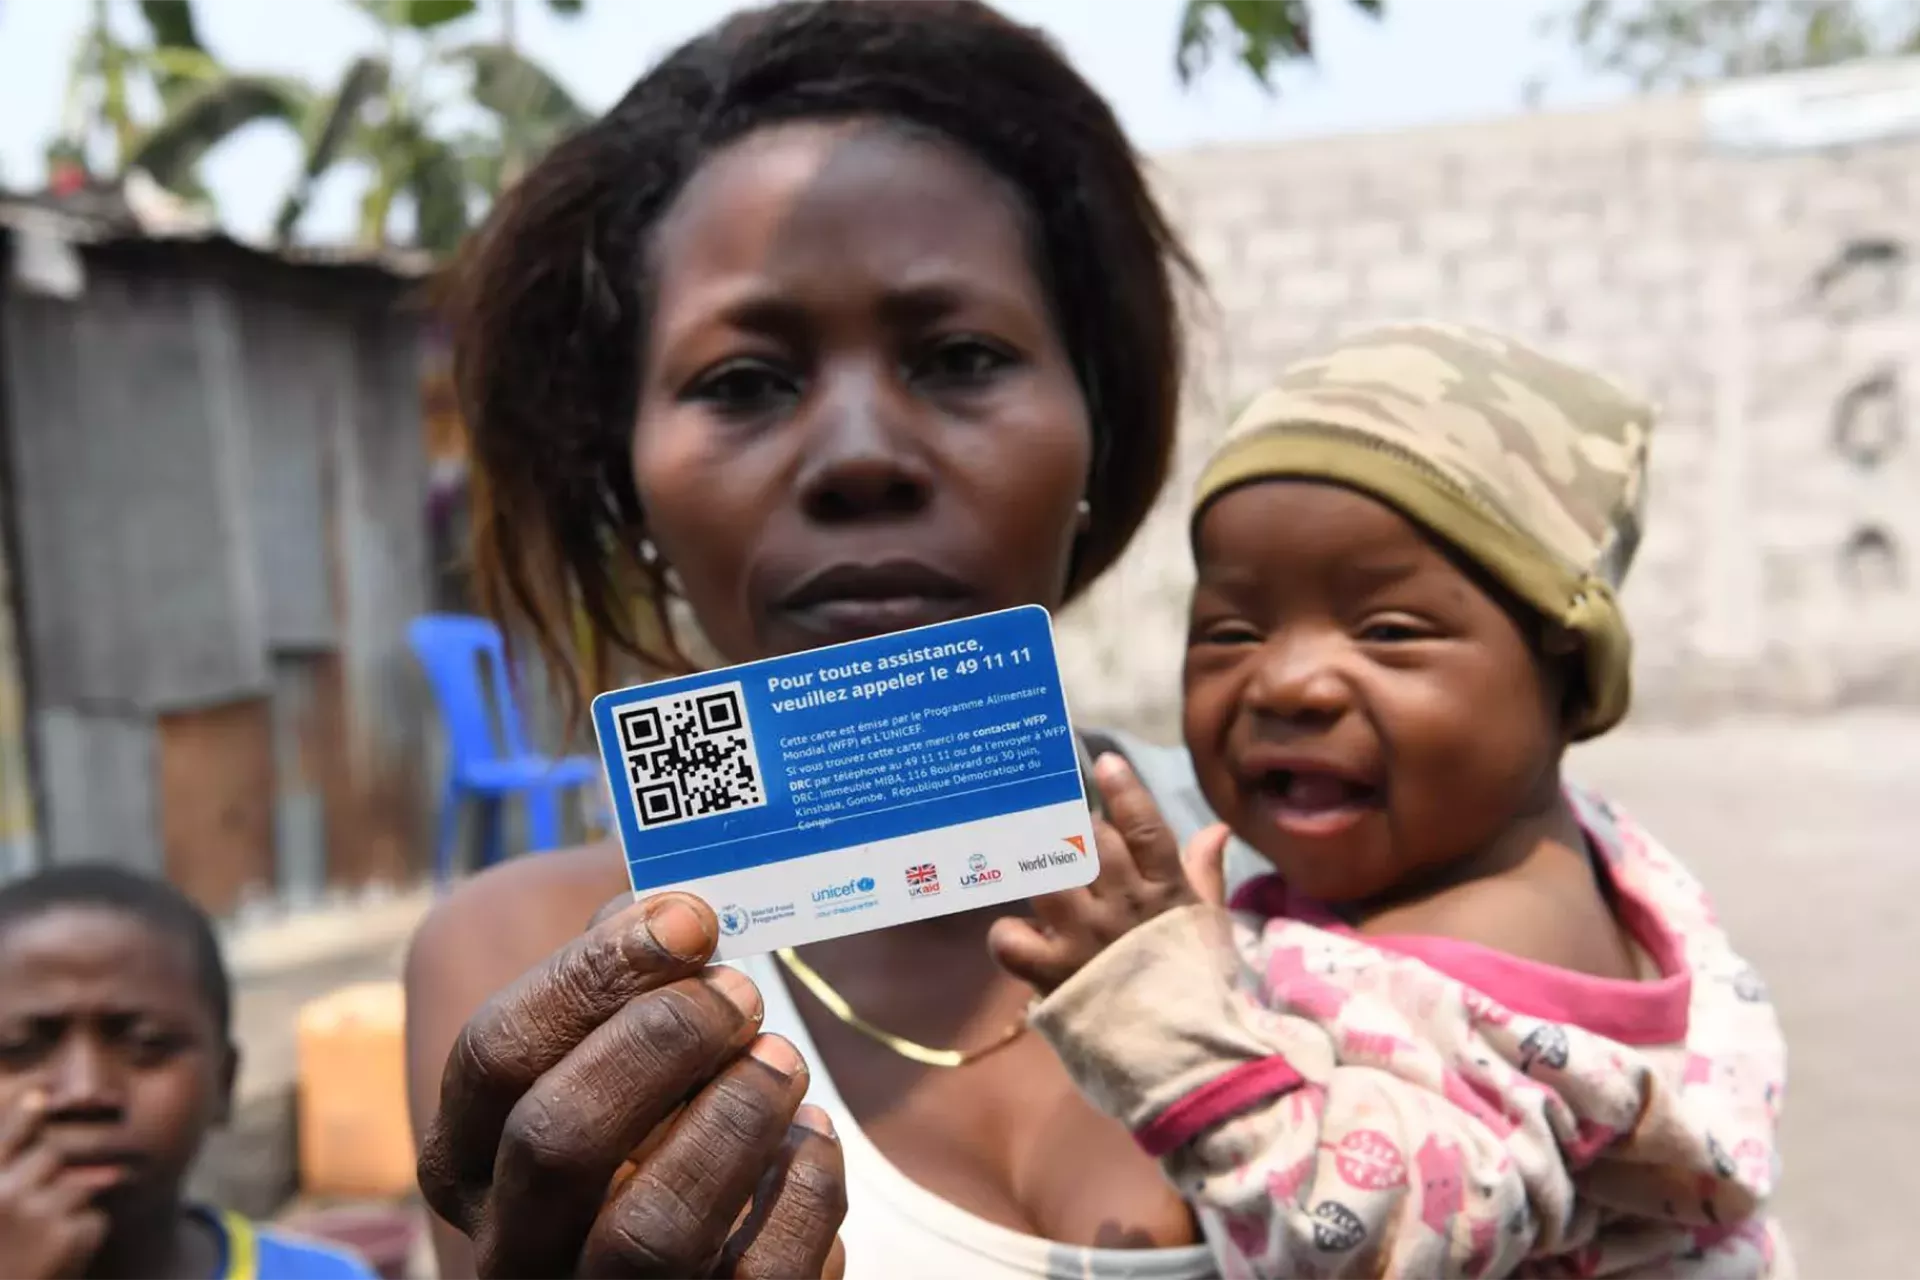 A woman, who is holding a baby, holds up a card